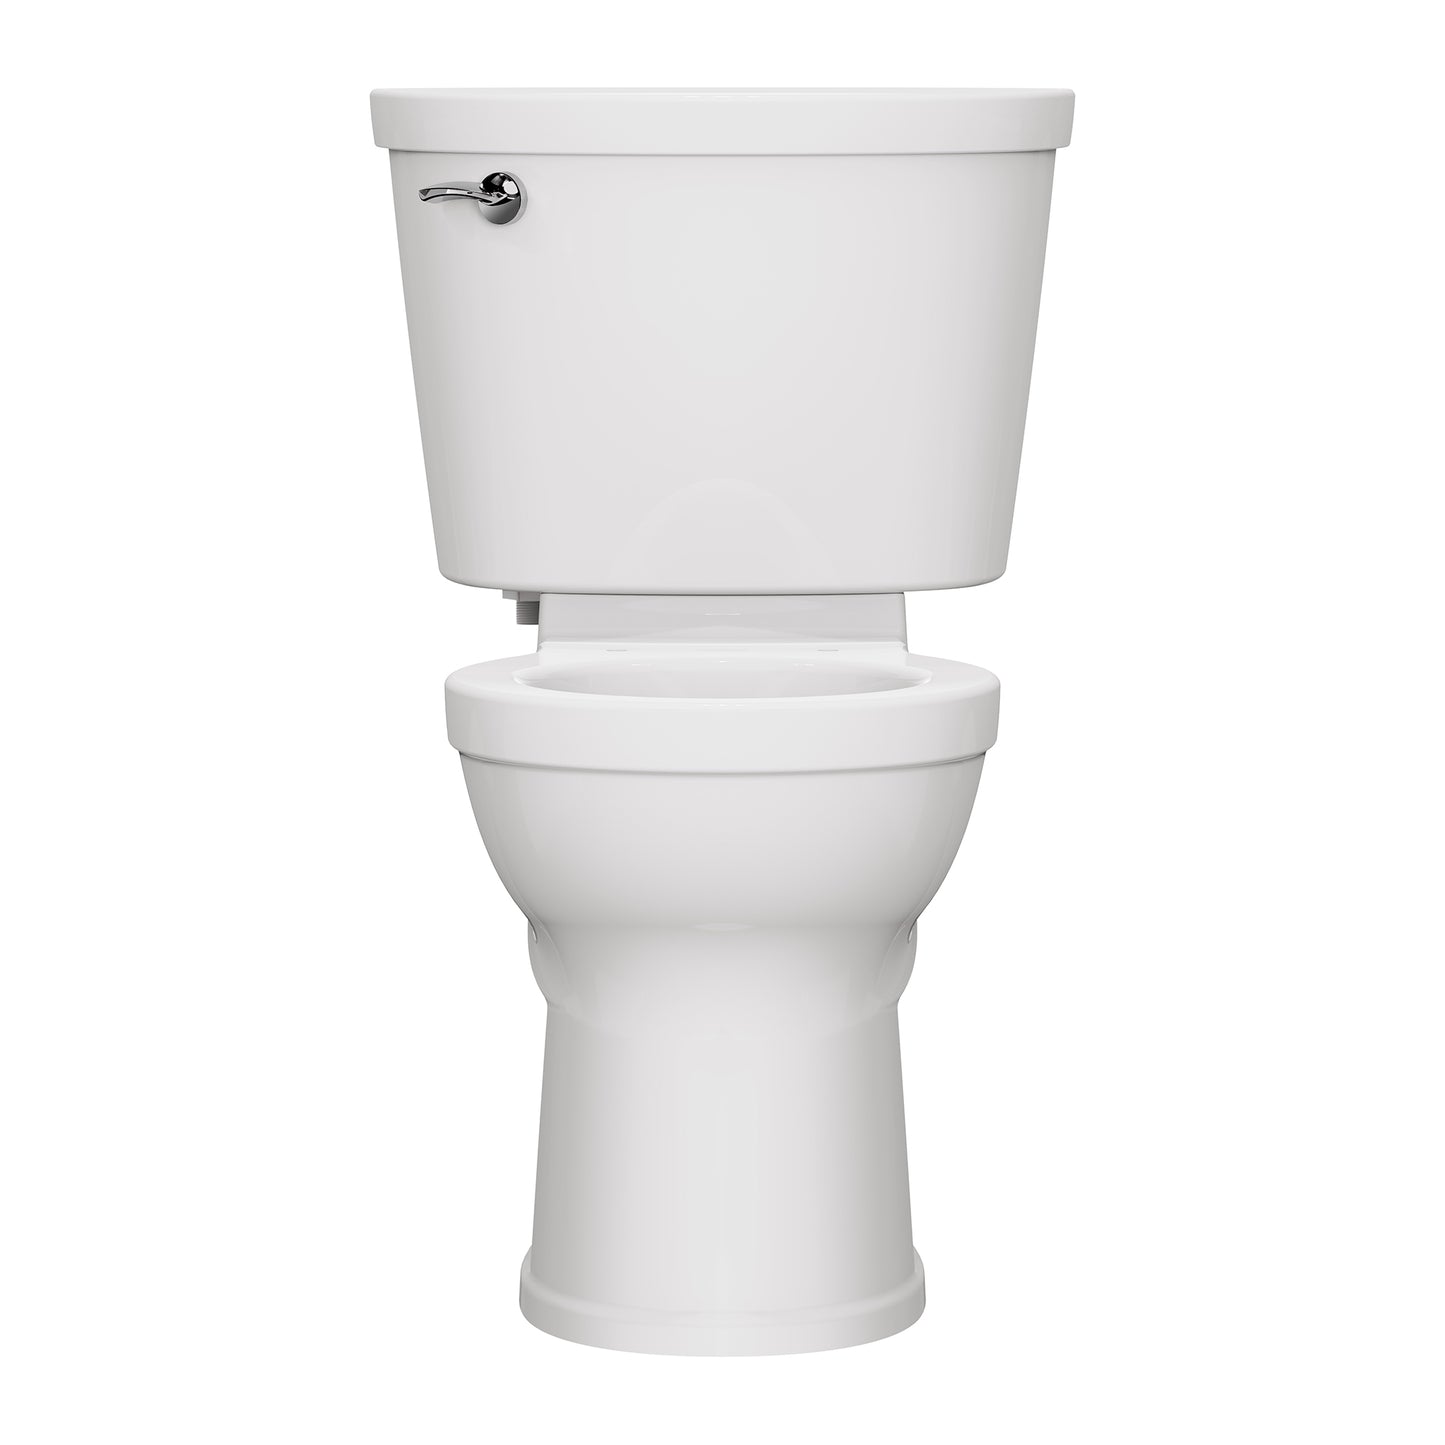 AMERICAN-STANDARD 211BA104.020, Champion PRO Two-Piece 1.28 gpf/4.8 Lpf Chair Height Round Front Toilet Less Seat in White